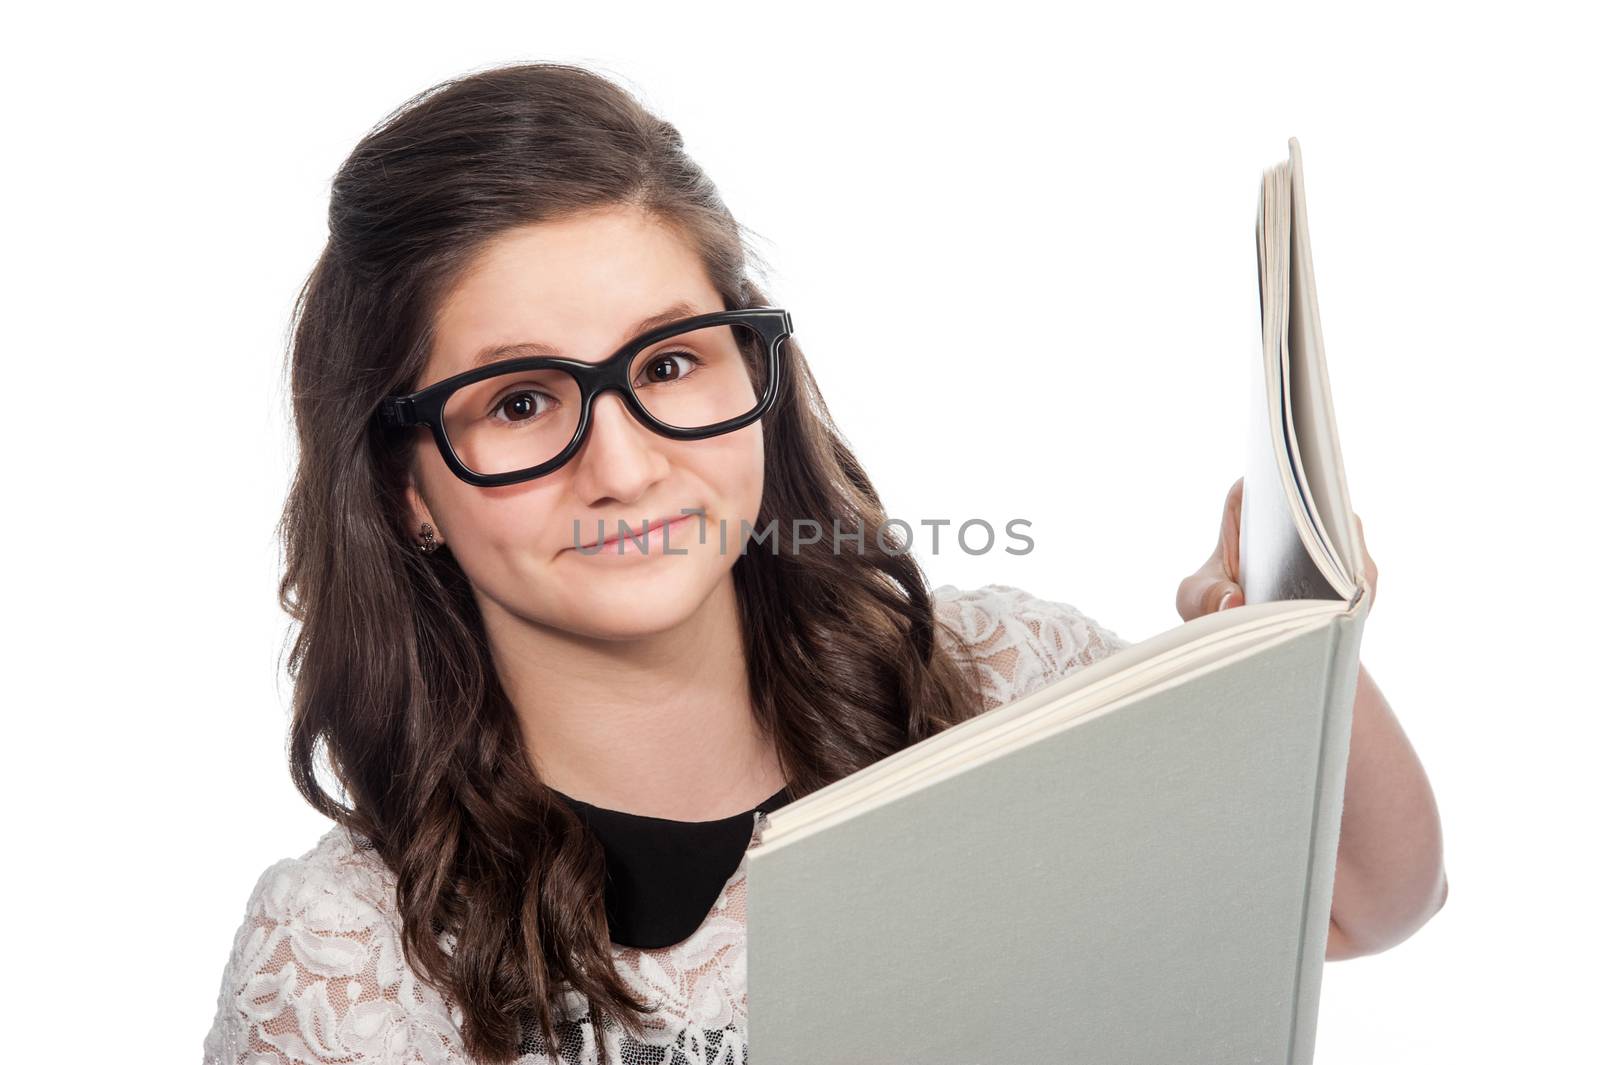 Brainy clever teenager with big glasses reading a big book on white background.